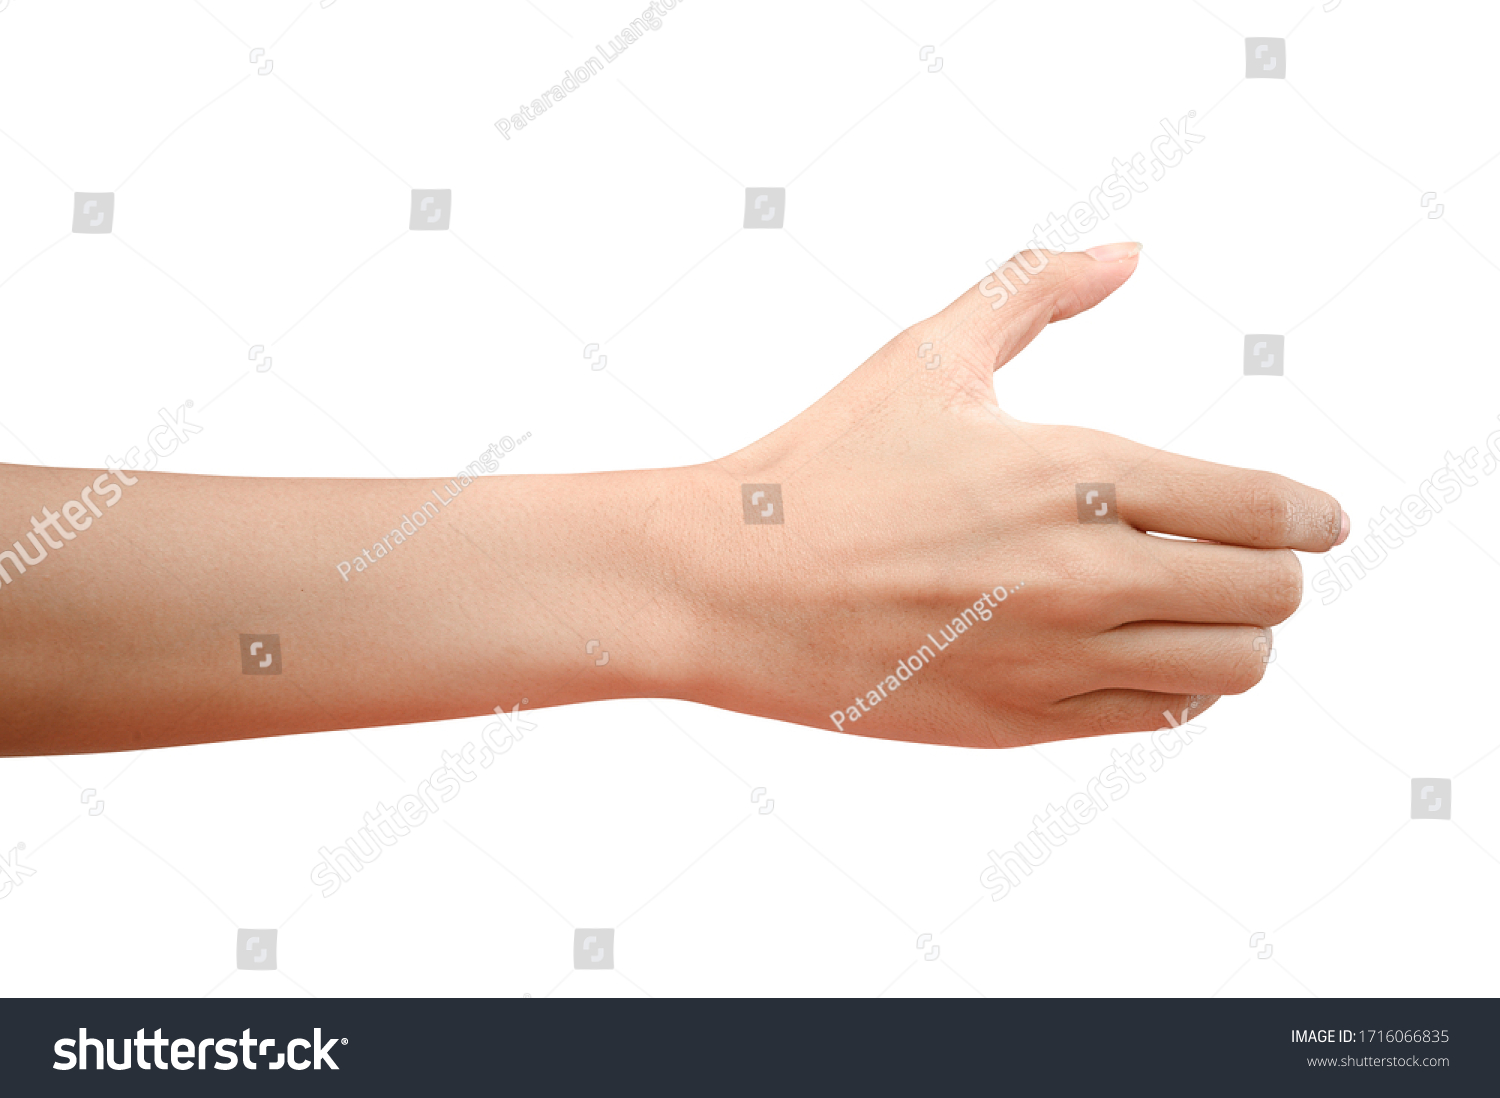 Close up hand holding something like a bottle or can isolated on white background with clipping path. #1716066835